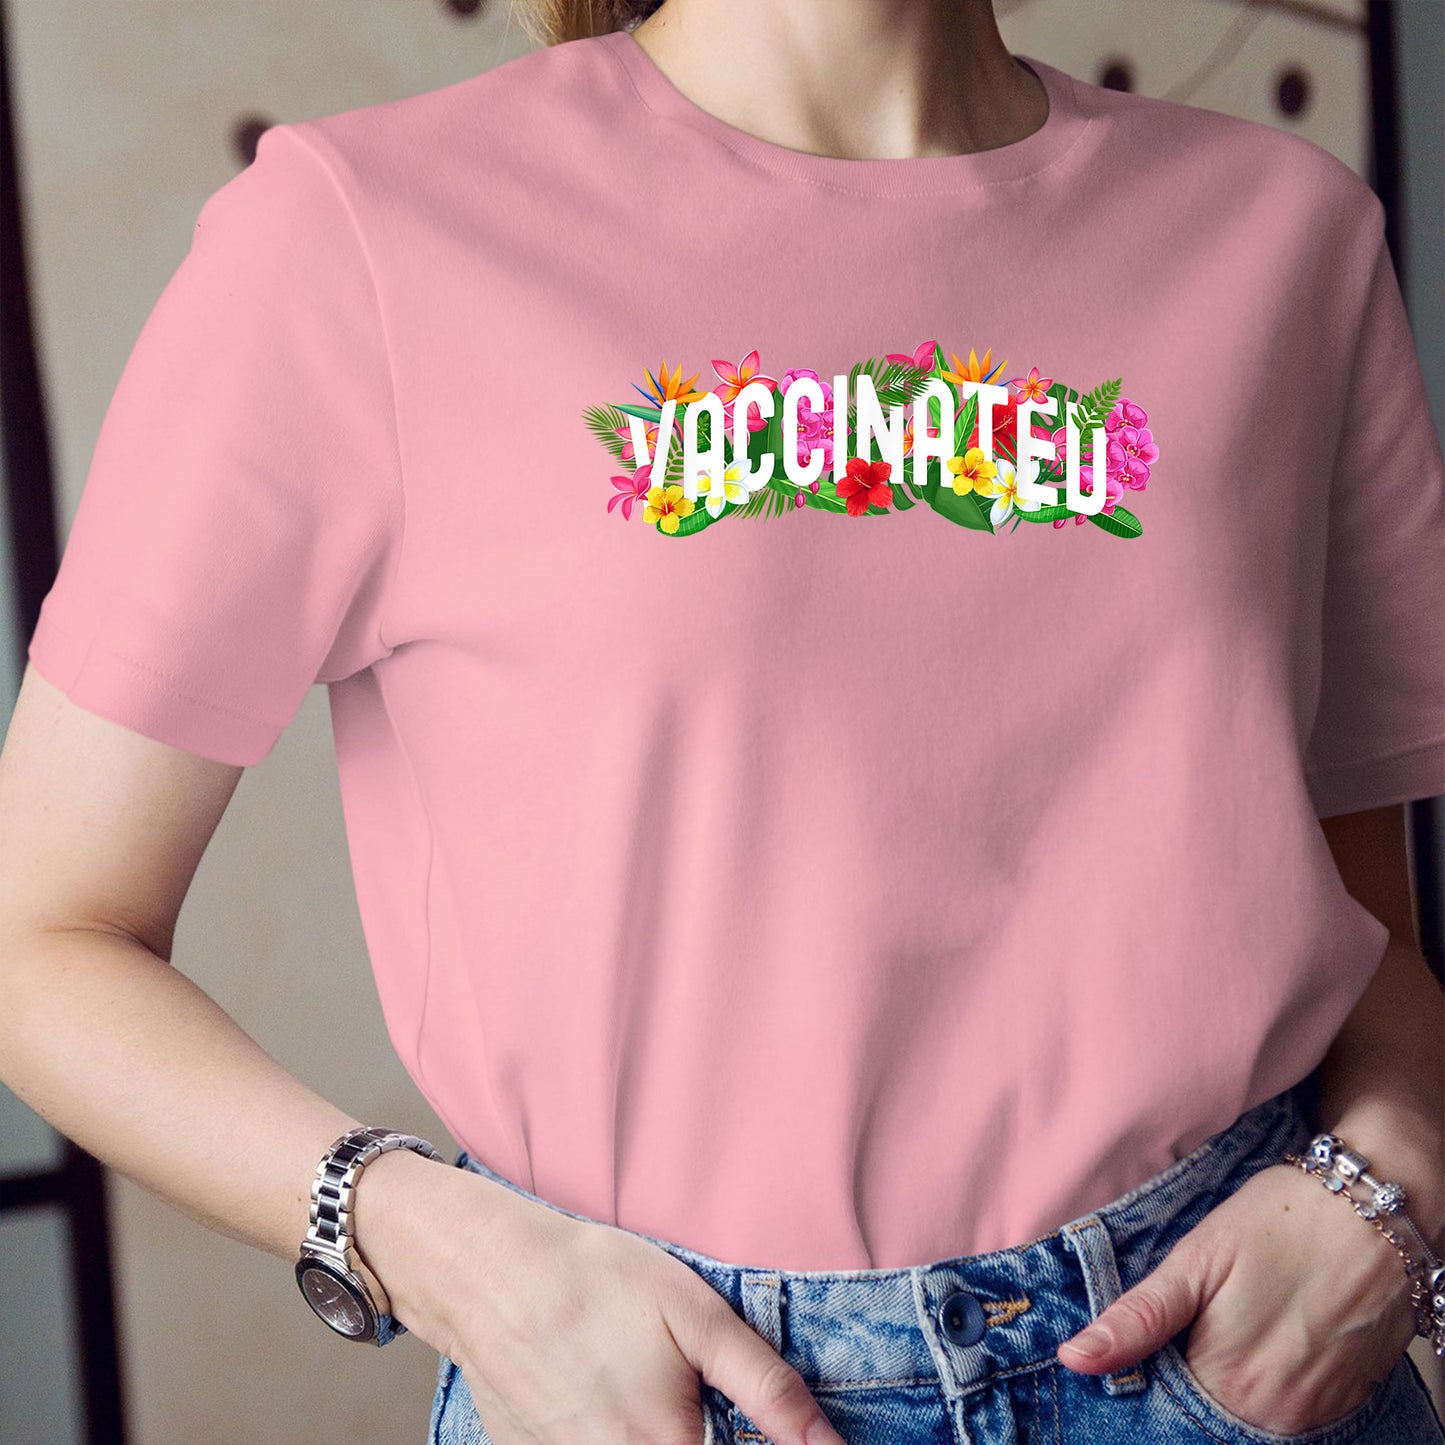 Vaccinated Shirt, Im Vaccinated Floral ProVaccination Summer Vaccine Gift TShirt, Cotton Shirt,  Women Shirt